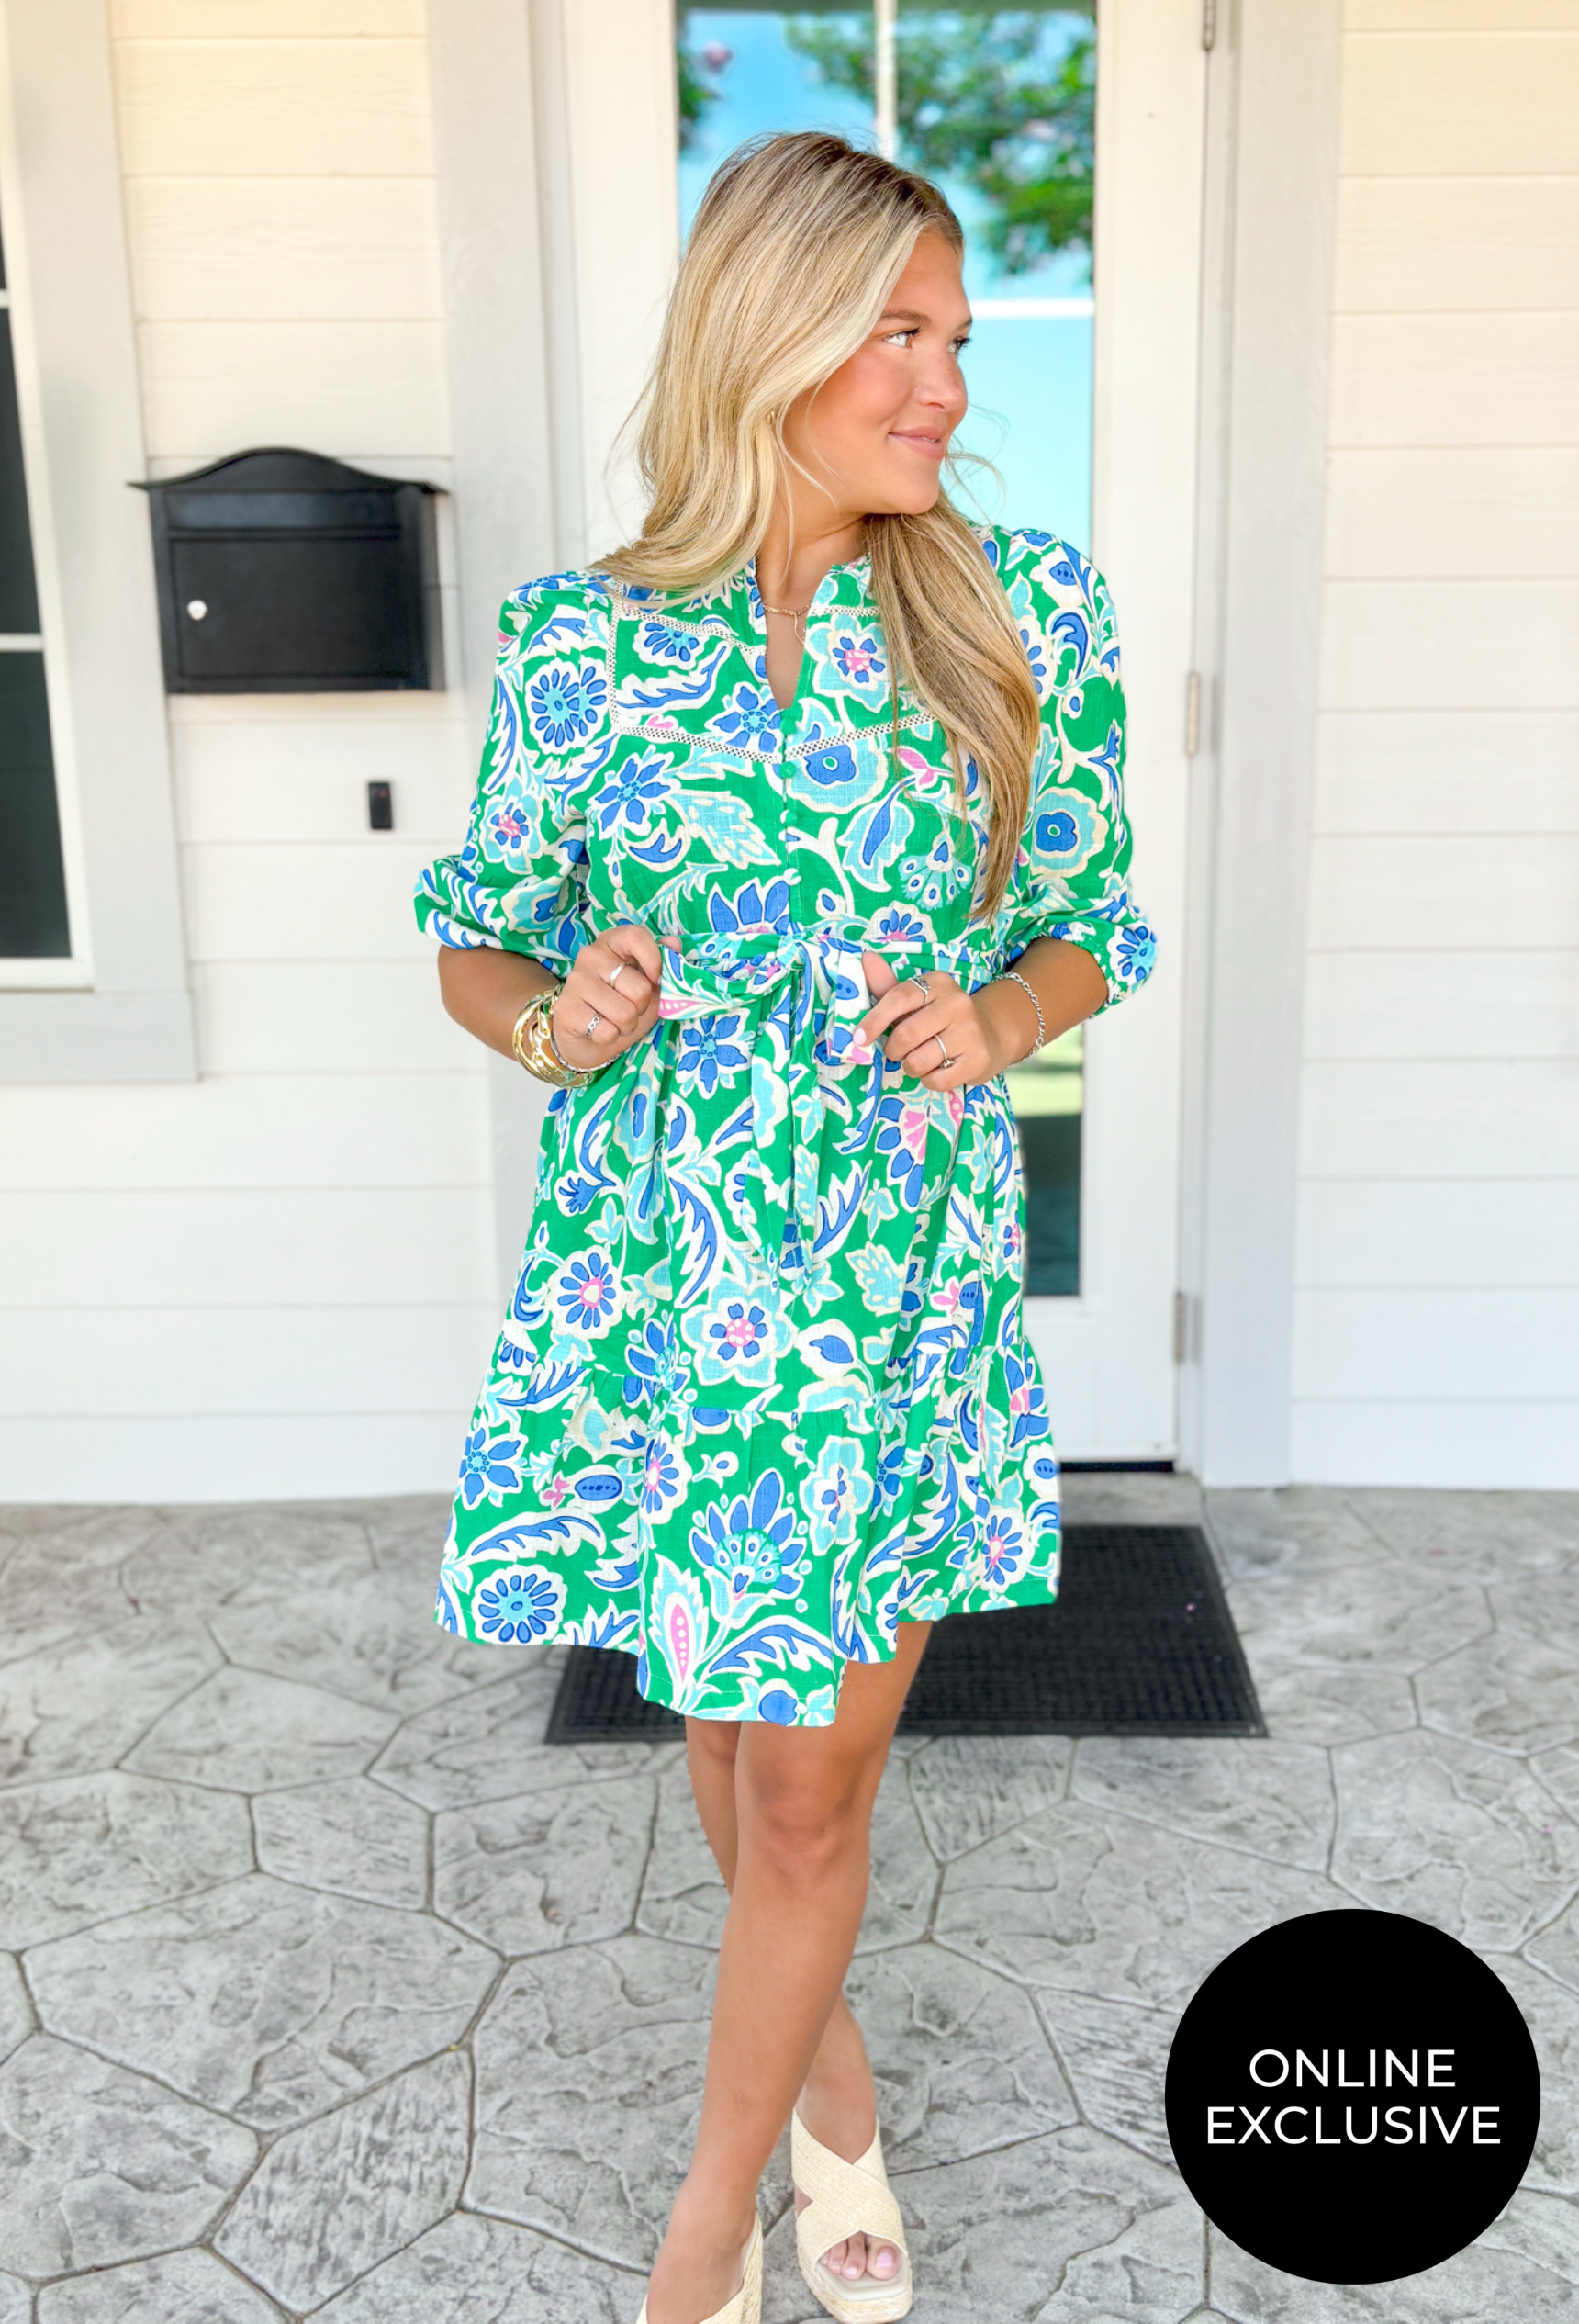 Breath Of Fresh Air Dress, kelly green quarter sleeve button down floral print dress with white lace details and cobalt blue and pink paisley floral design, tie belt around the waist